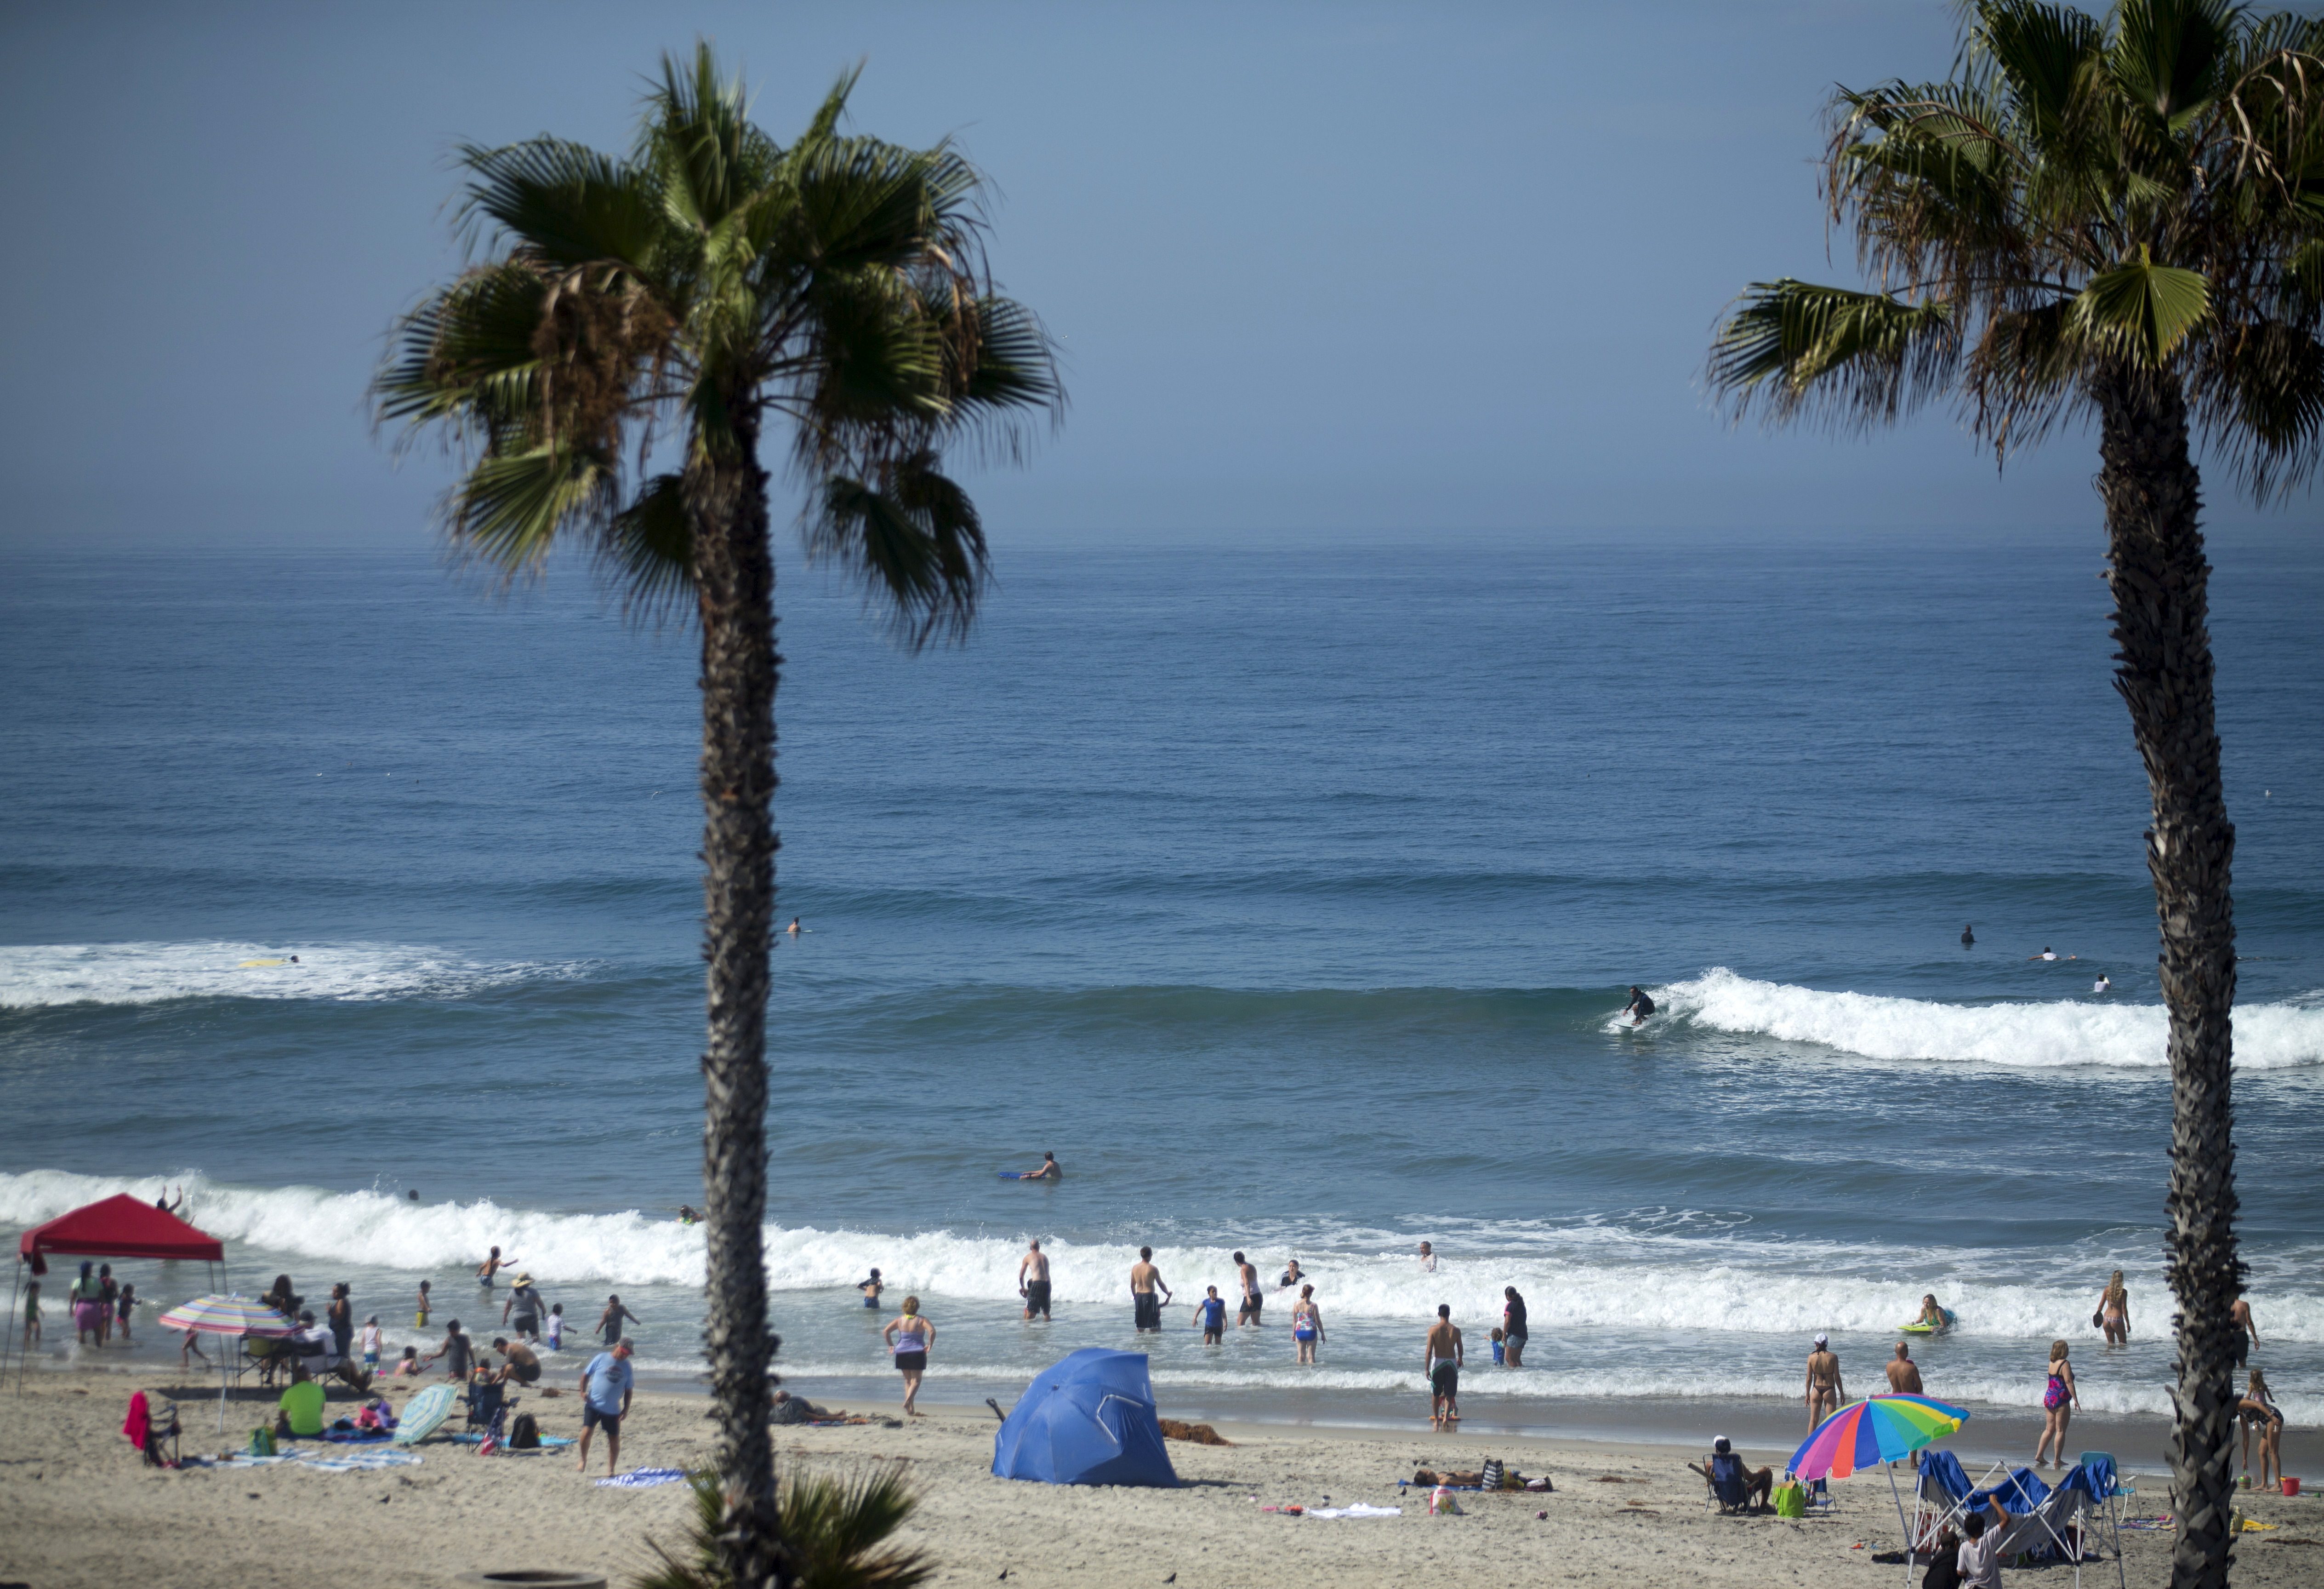 People gather at the beach to cool off as a heat wave brings high temperatures and humidity to Oceanside, California